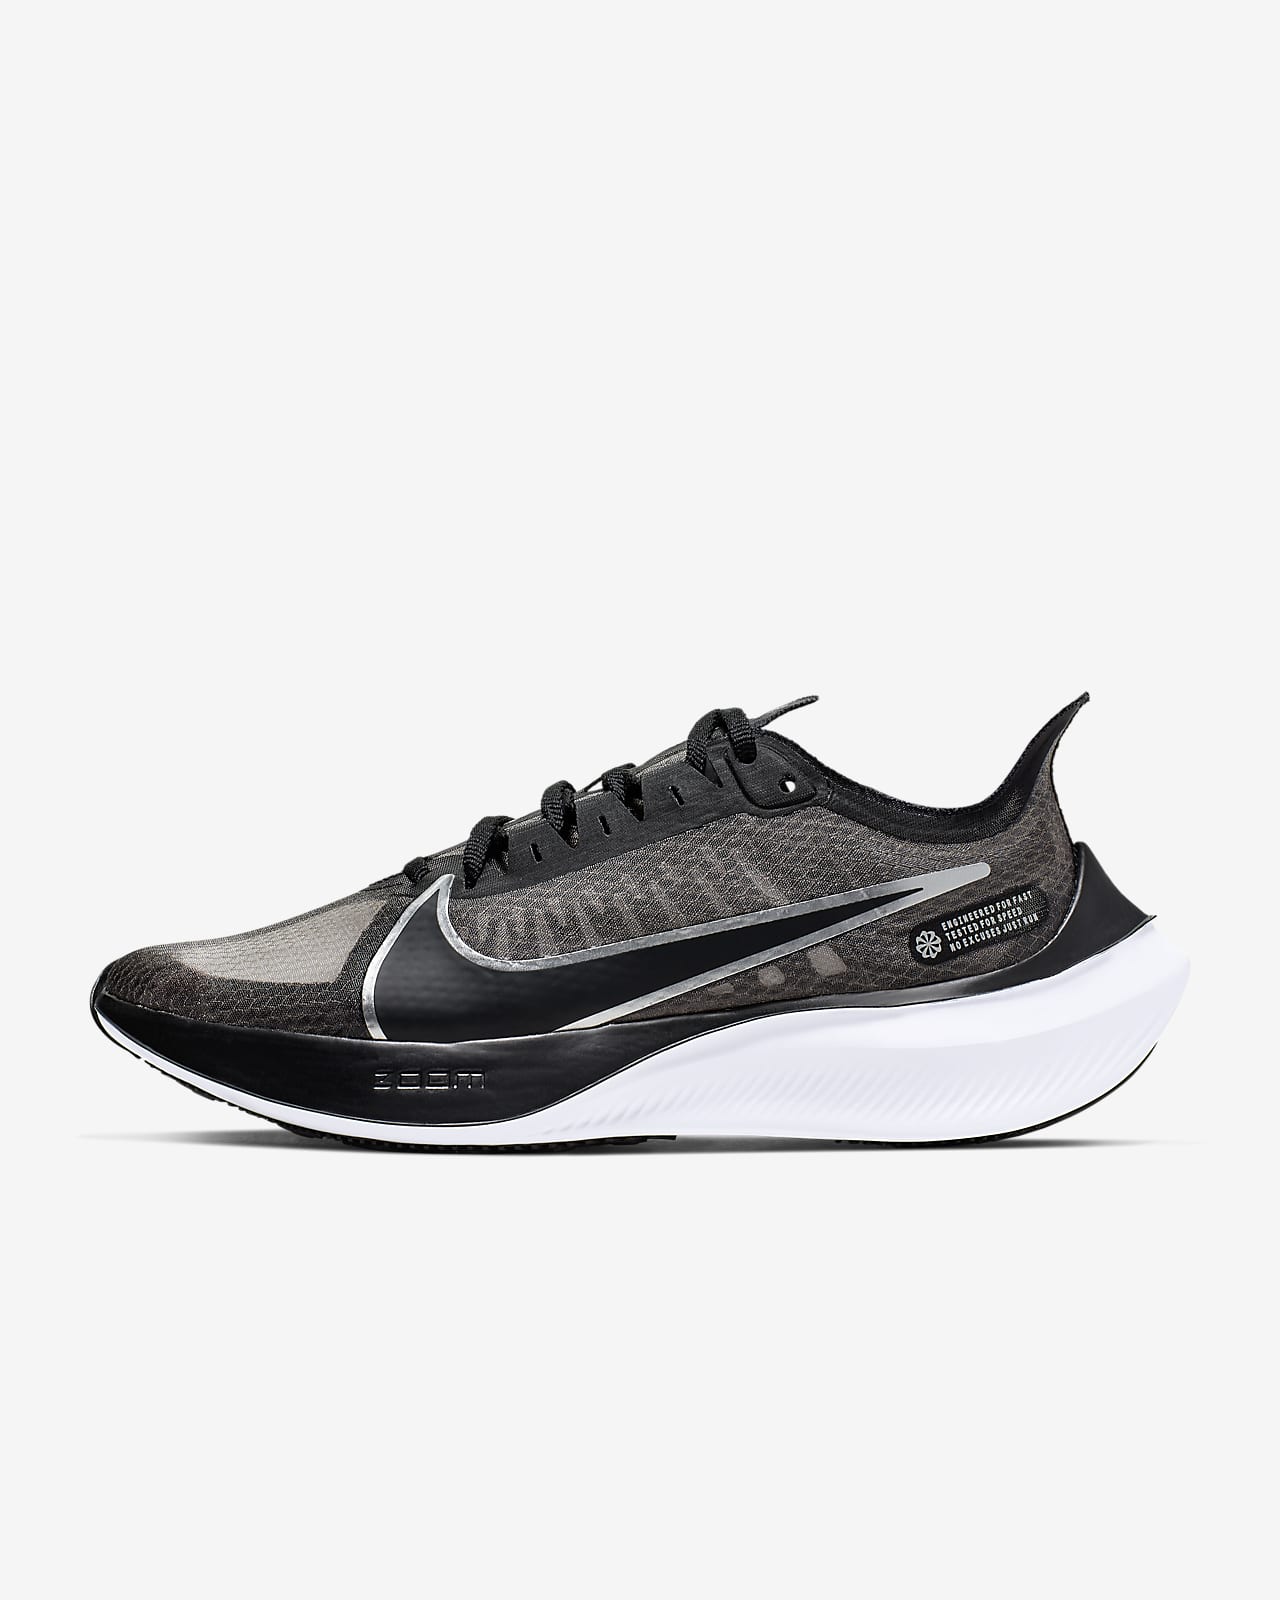 nike zoom gravity review